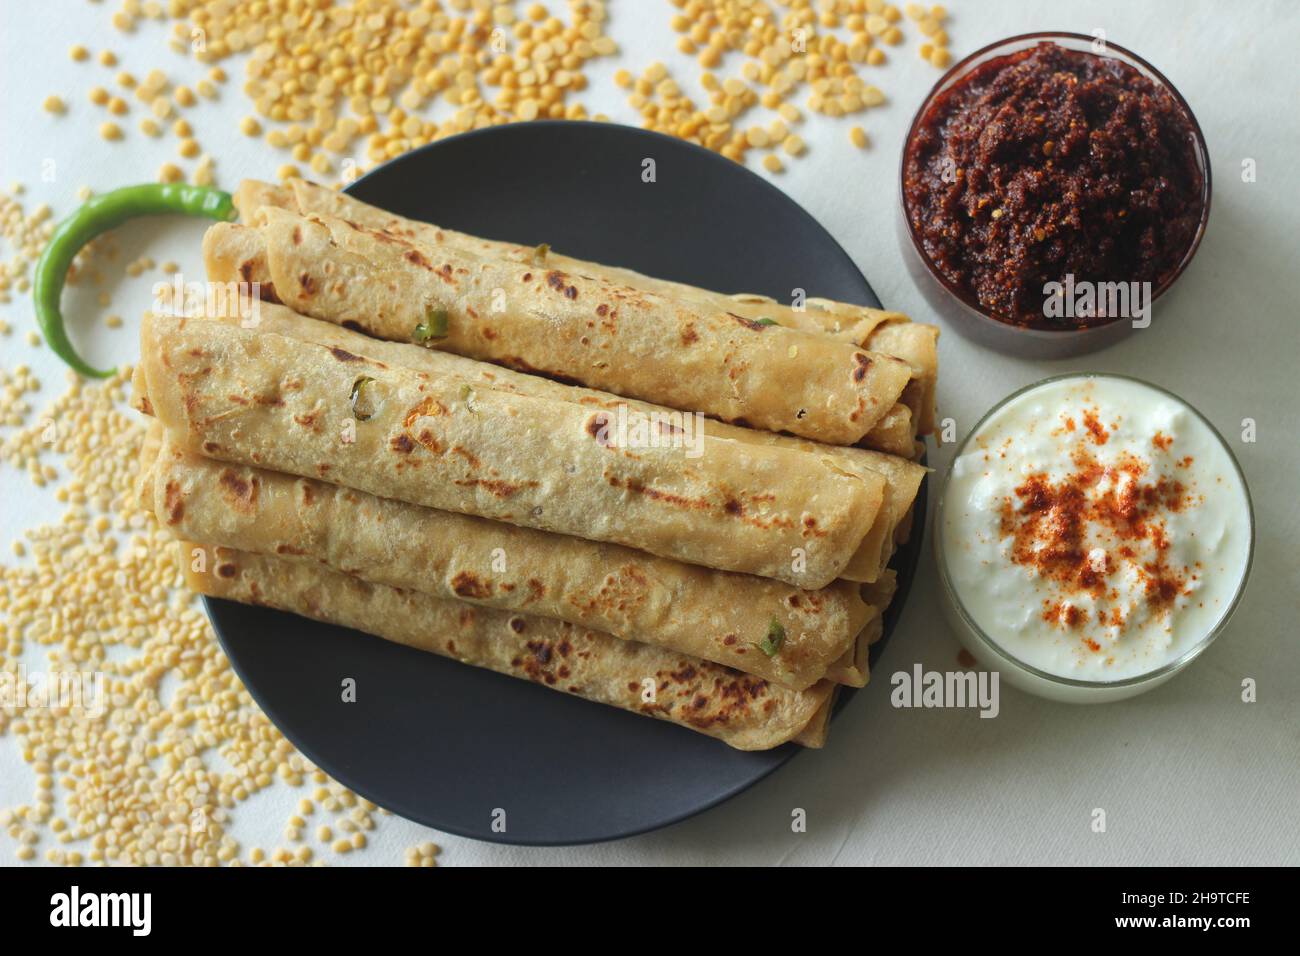 Daal paratha served with garlic chutney and curd. Indian flatbread with lentils and spices. A protein rich version of Indian paratha served with condi Stock Photo